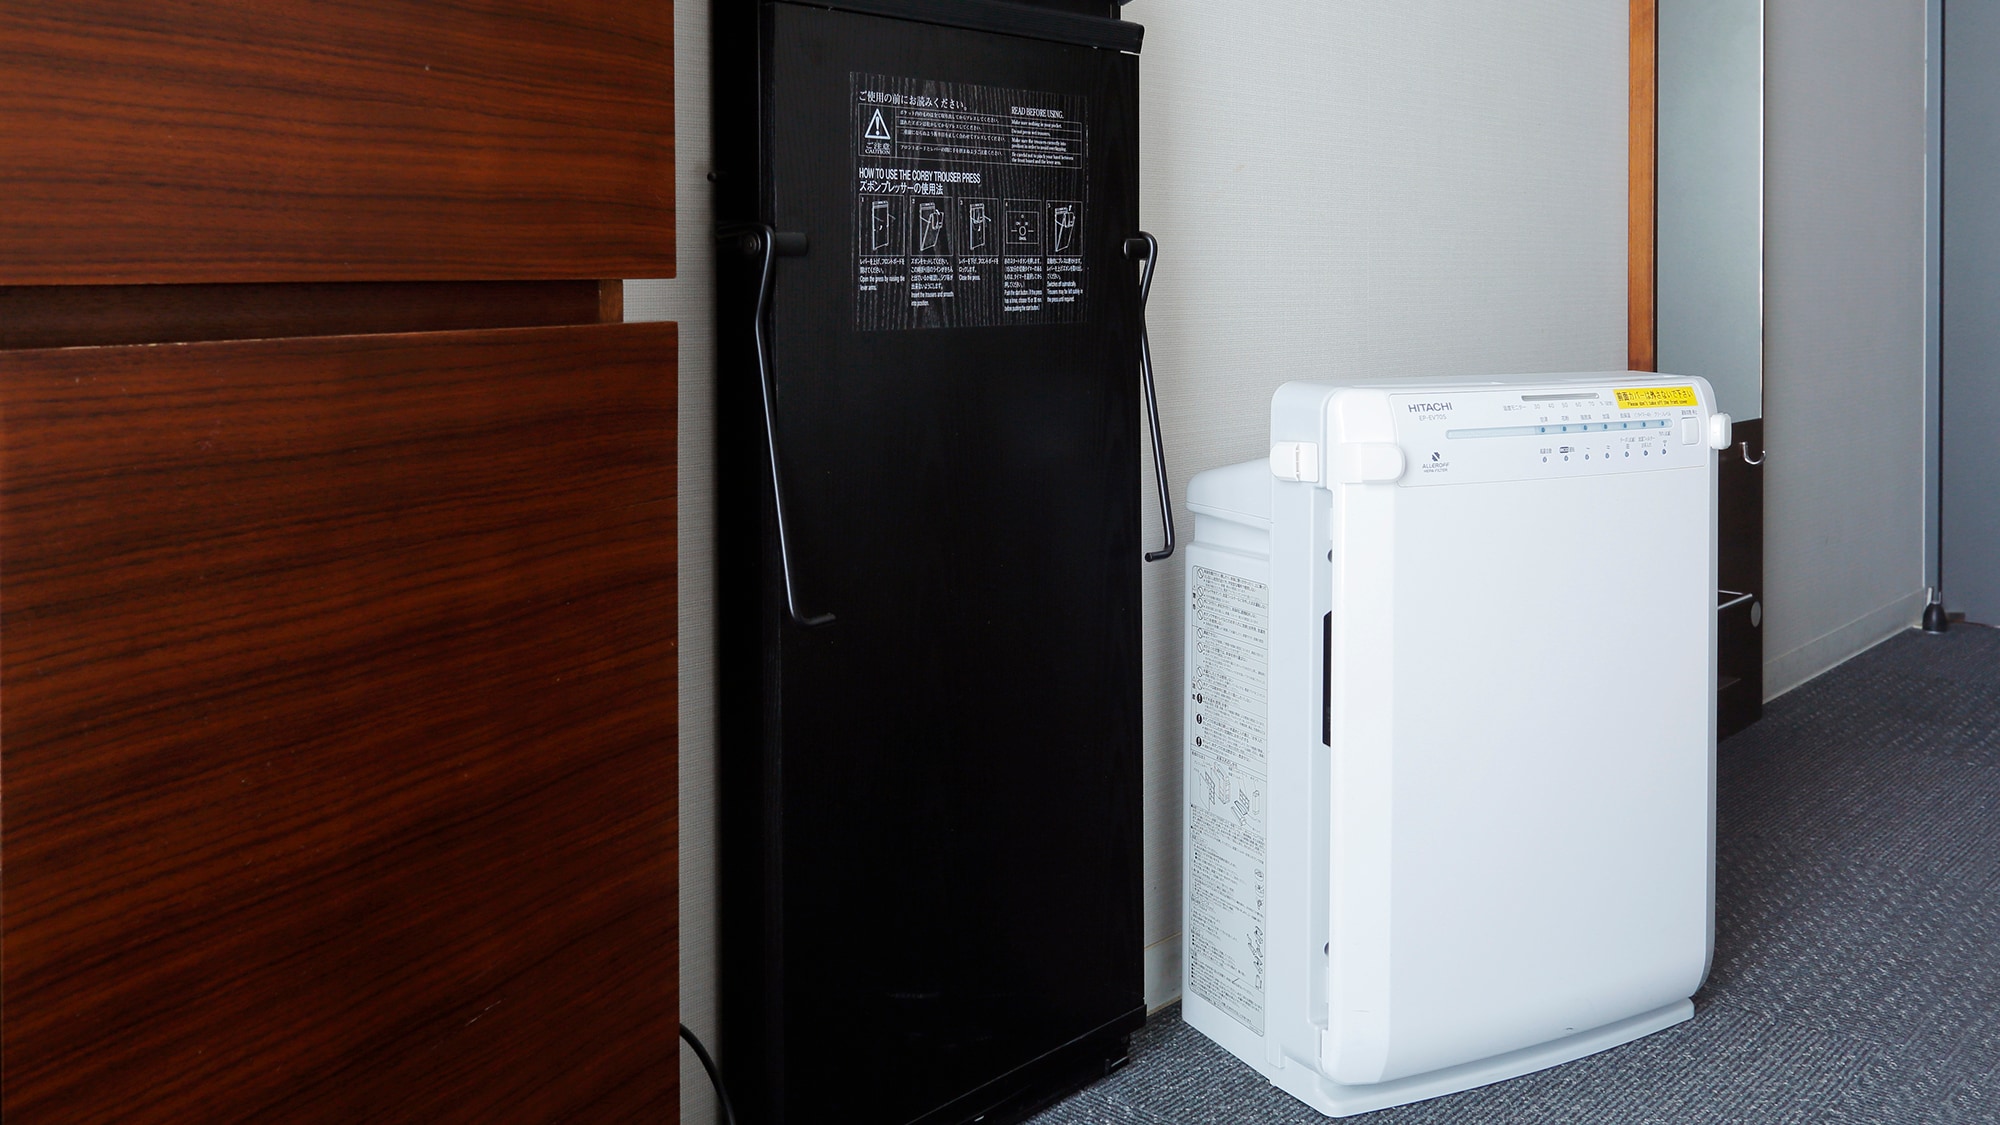 All rooms are equipped with a humidified air purifier and trouser press